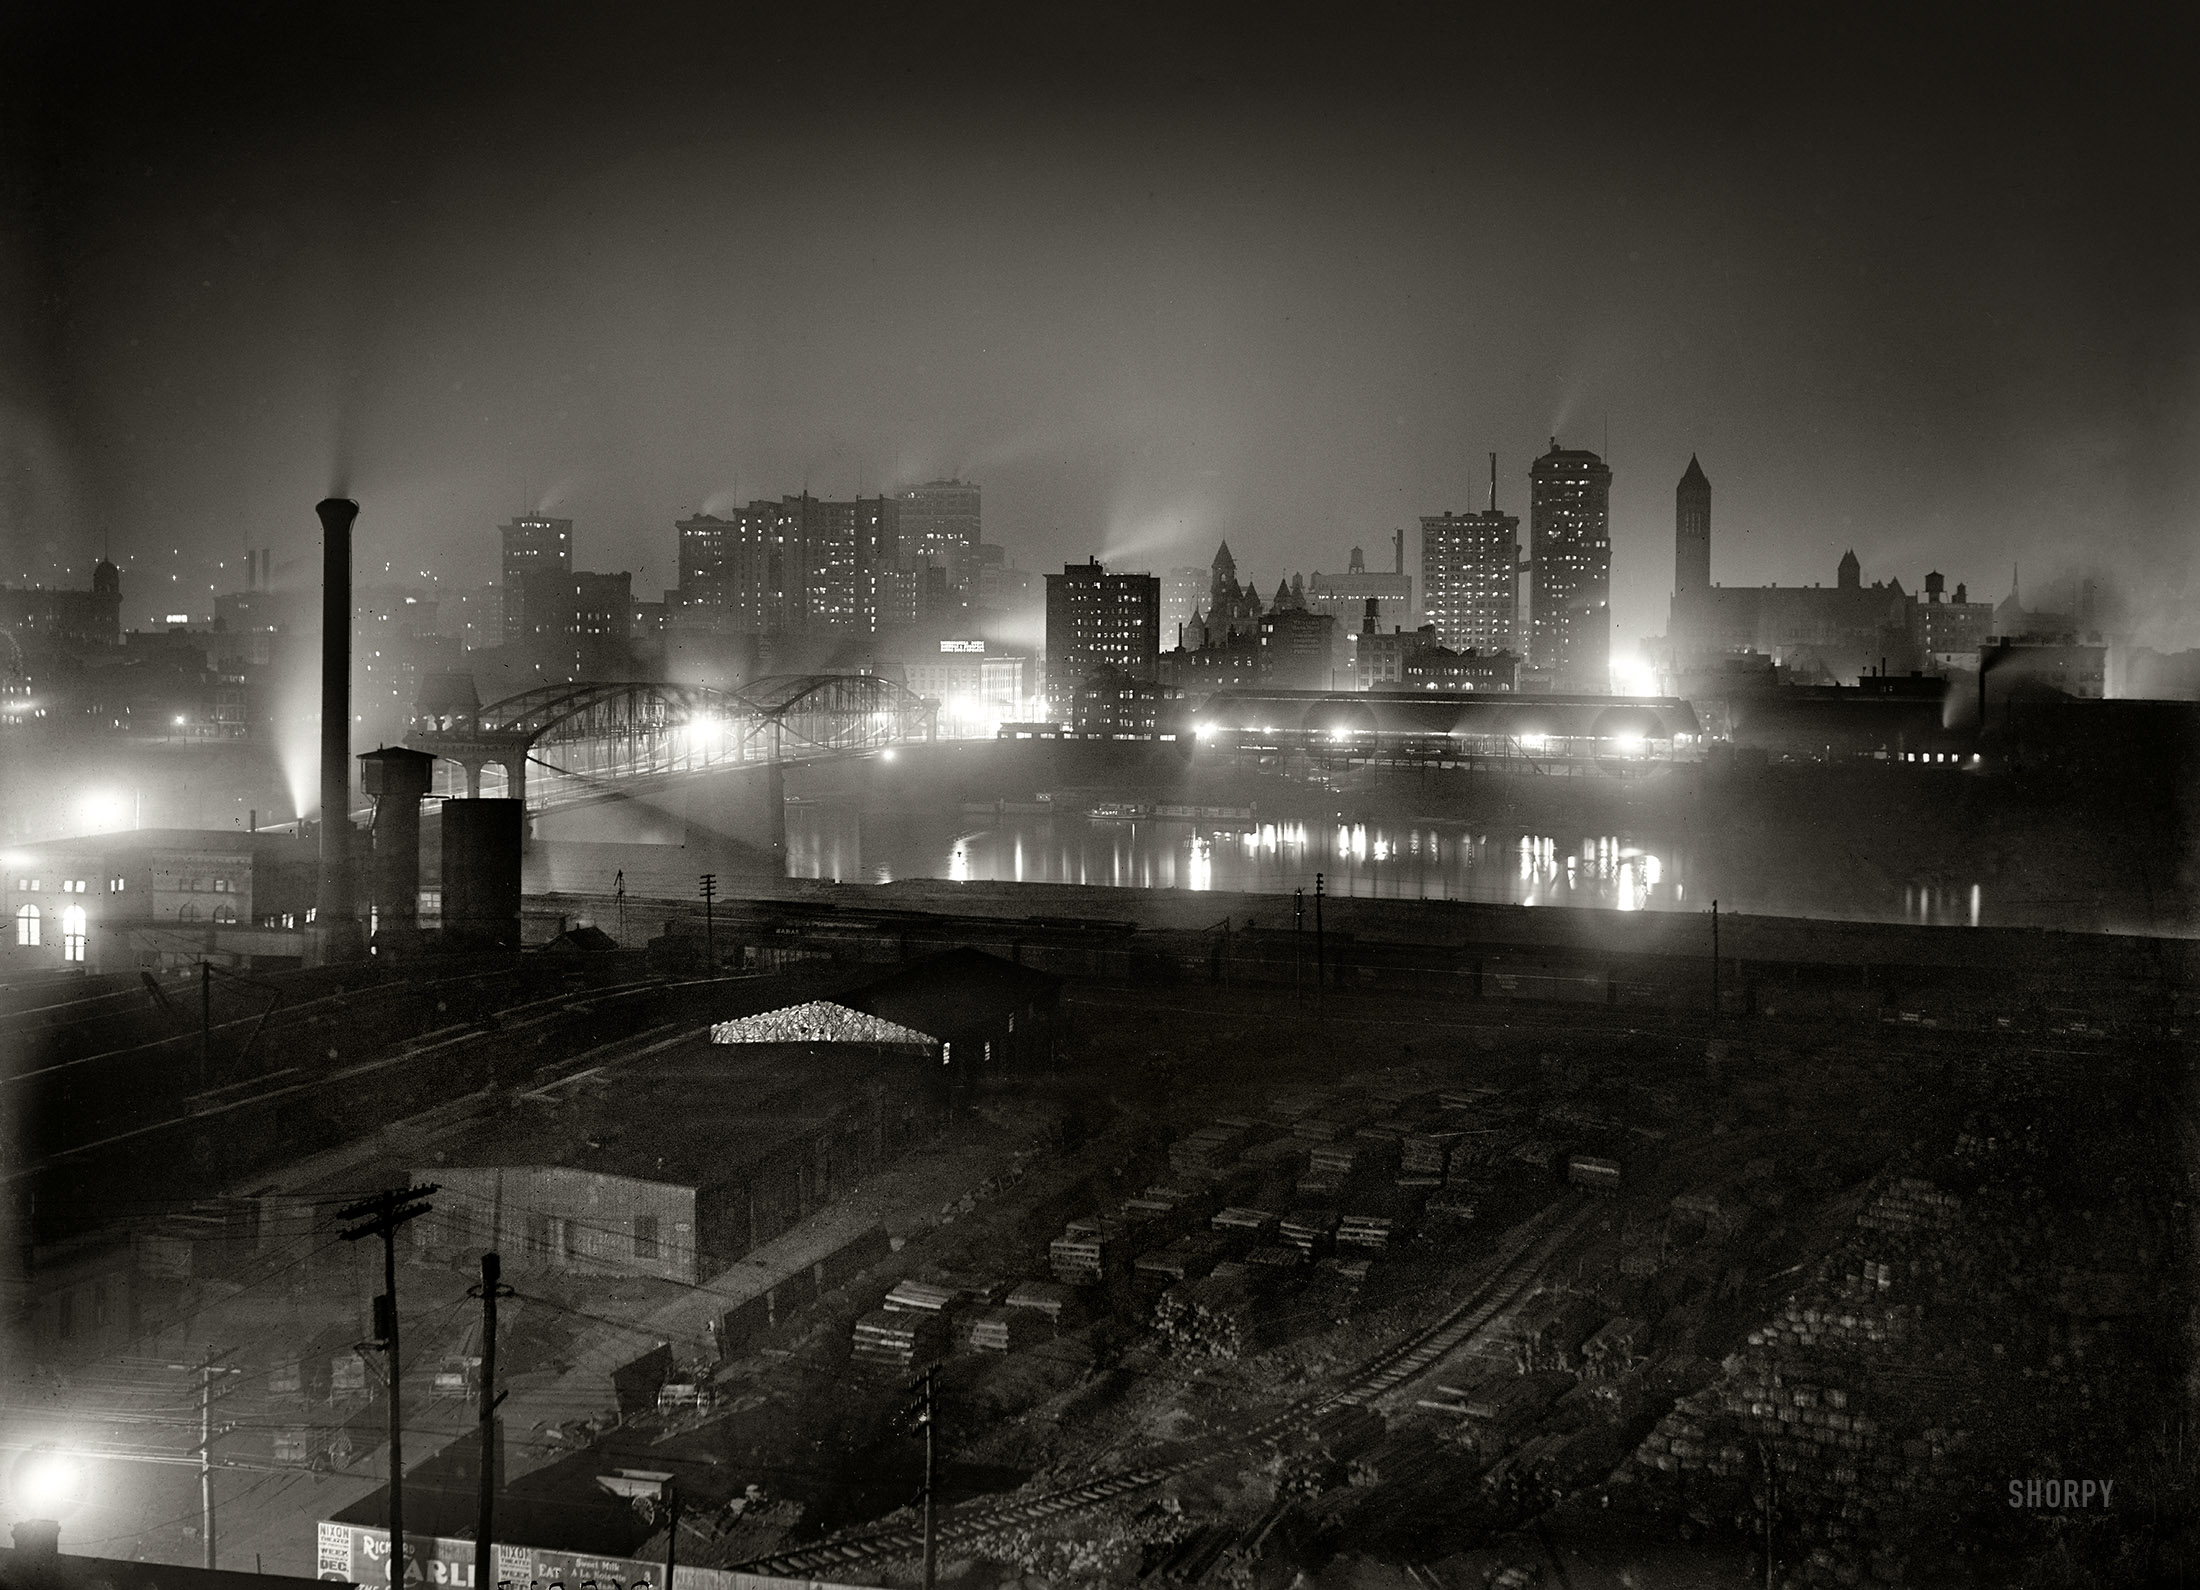 Circa 1907. "Pittsburgh by Night." Our second nocturnal view of the Steel City. 5x7 inch dry plate glass negative, Detroit Publishing Company. View full size.